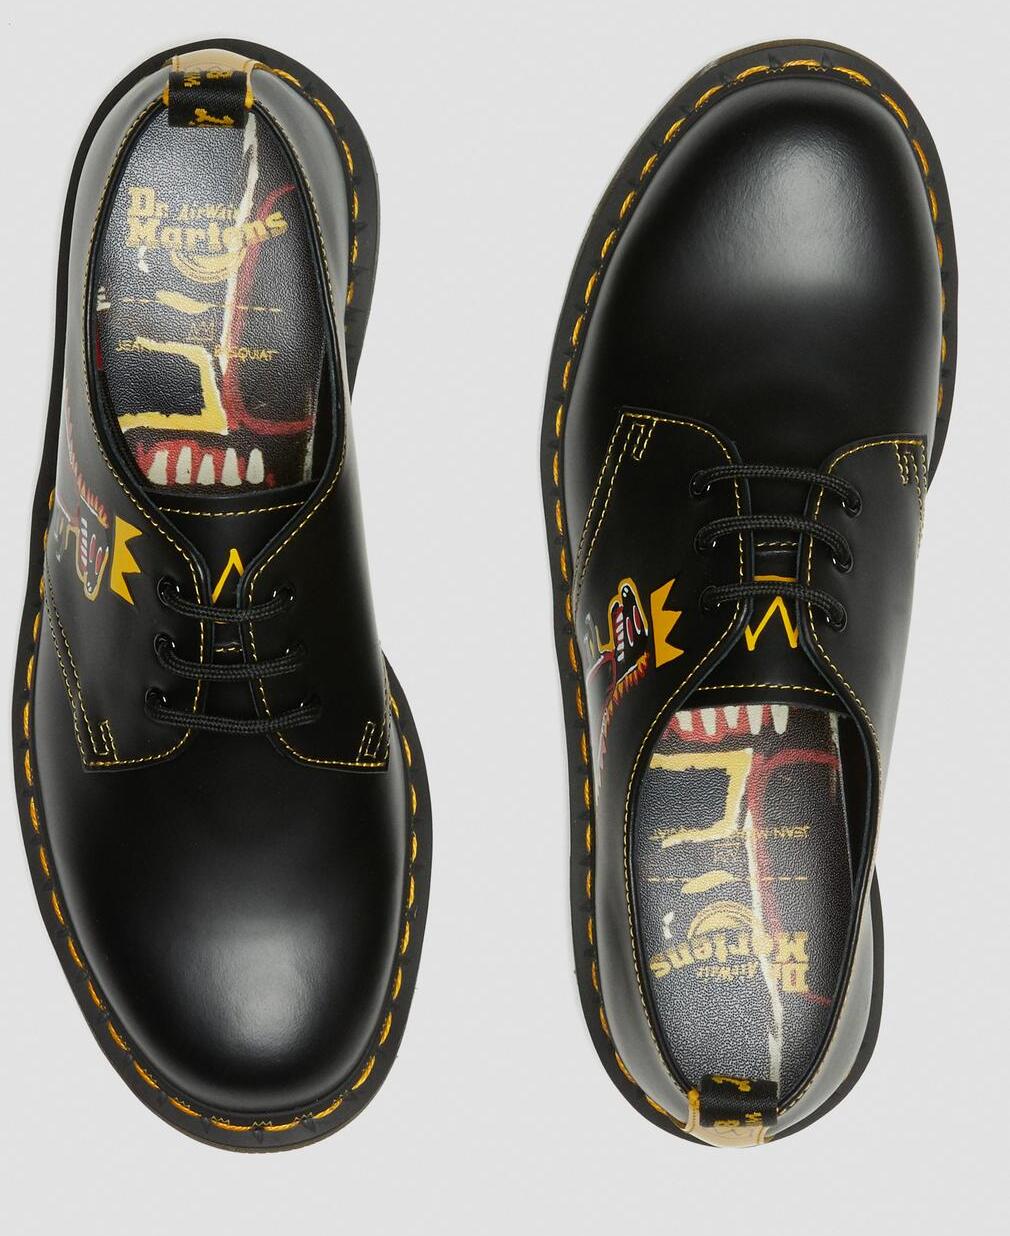 Dr. Martens 1461 Basquiat Leather Oxford Shoes Black Smooth